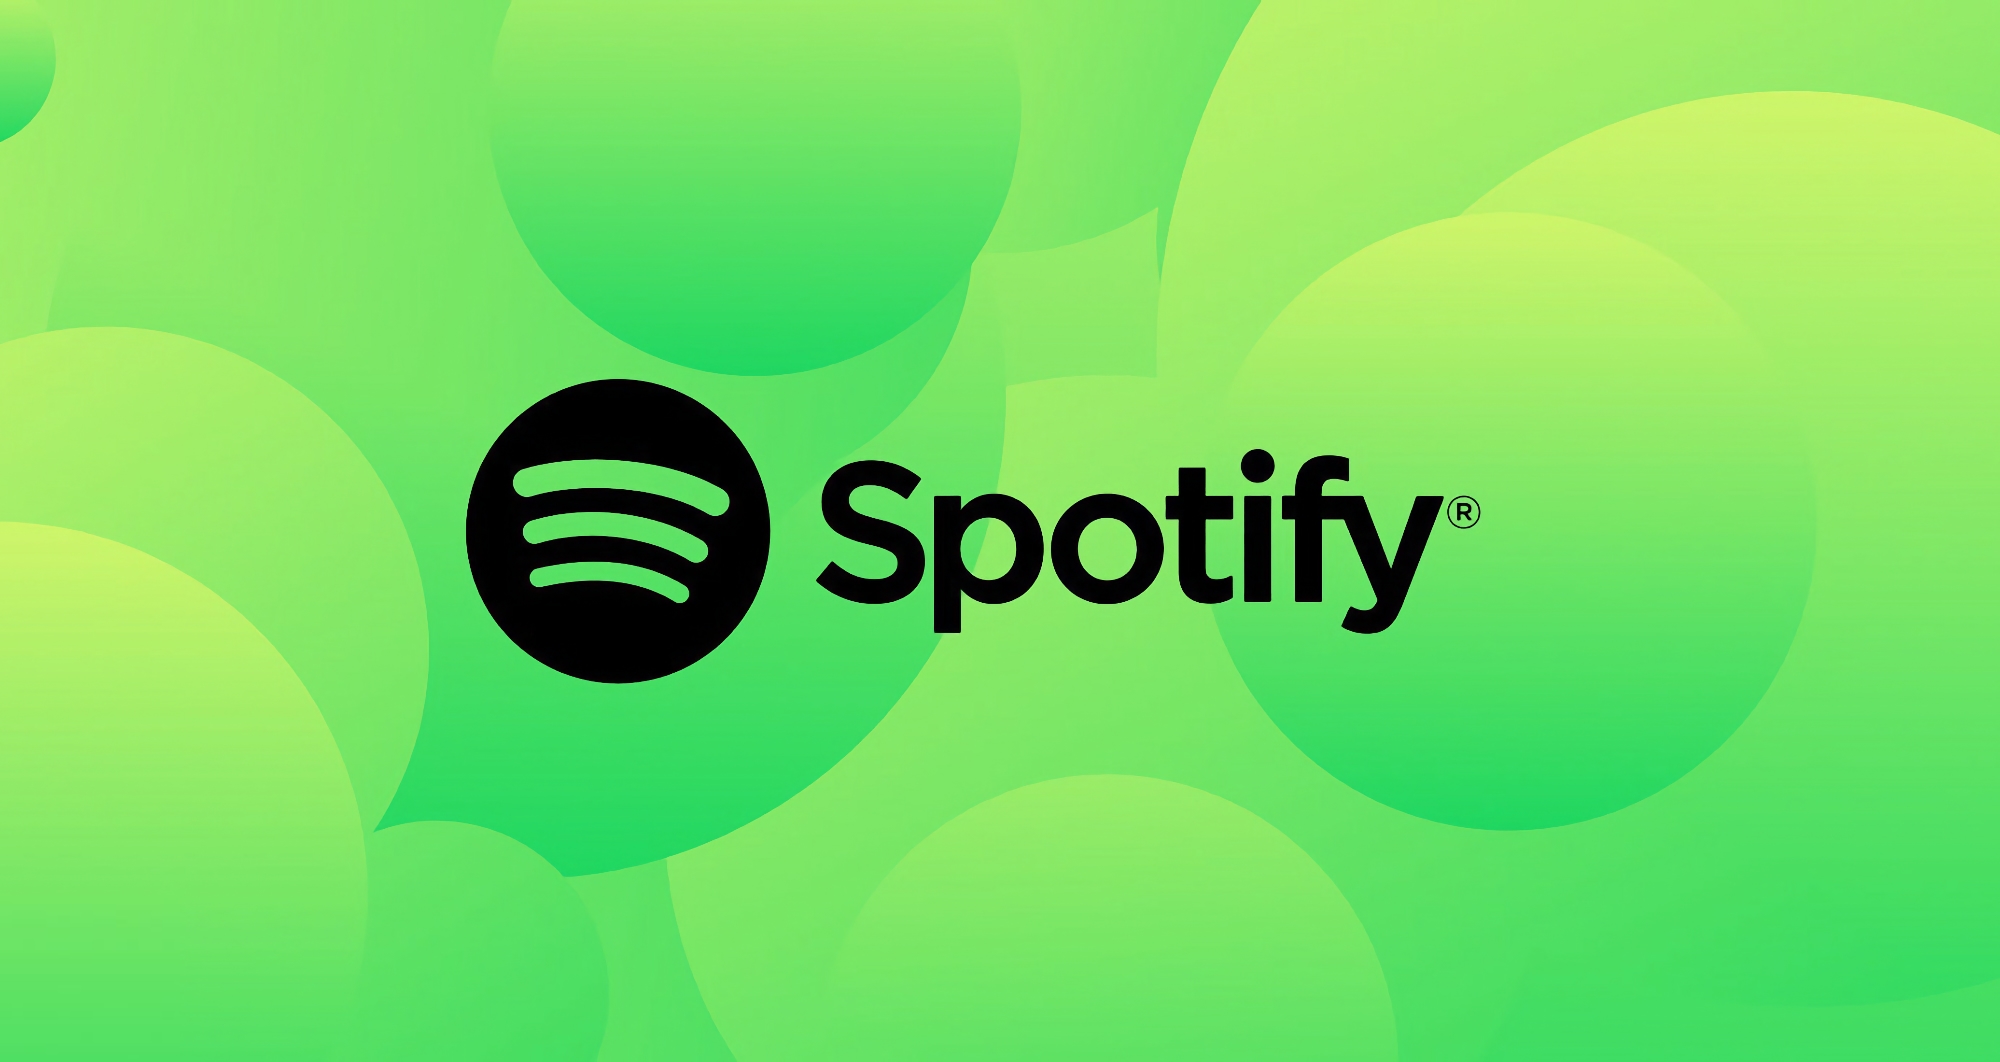 Bloomberg: Spotify will launch a new data plan with HiFi Audio this year